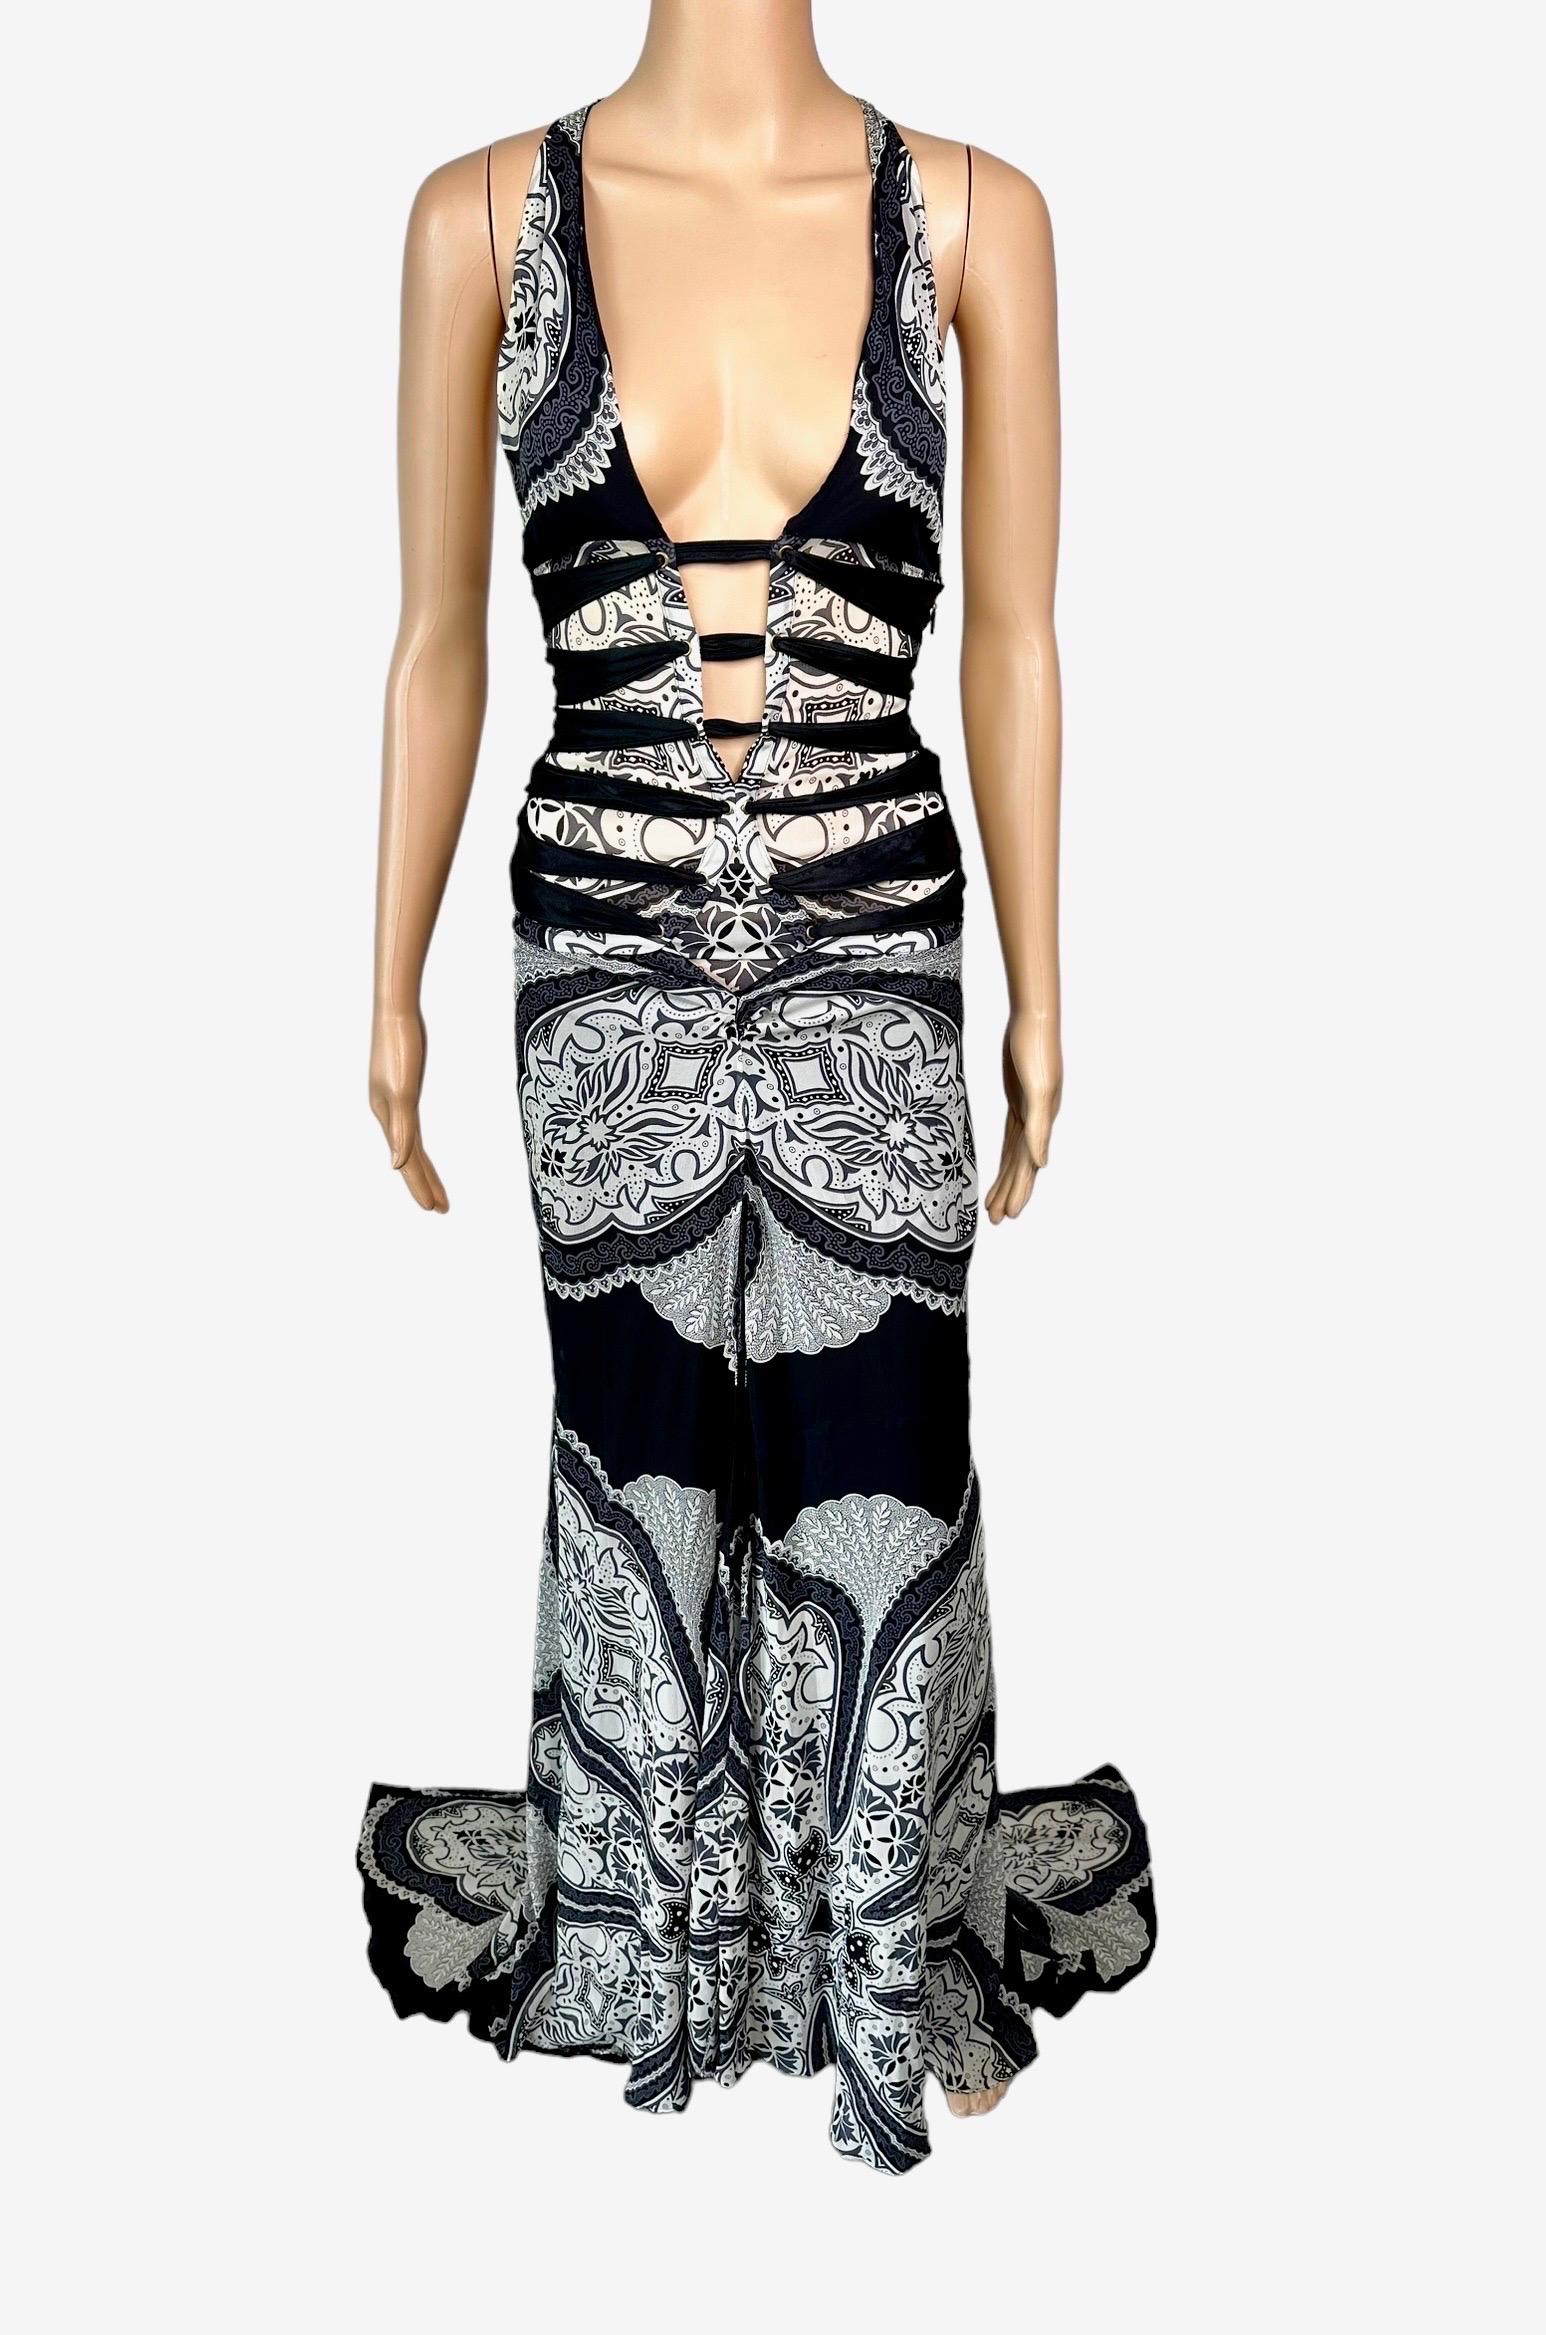 Tom Ford for Gucci Cruise 2004 Plunging Cutout Strappy Silk Evening Dress Gown 1